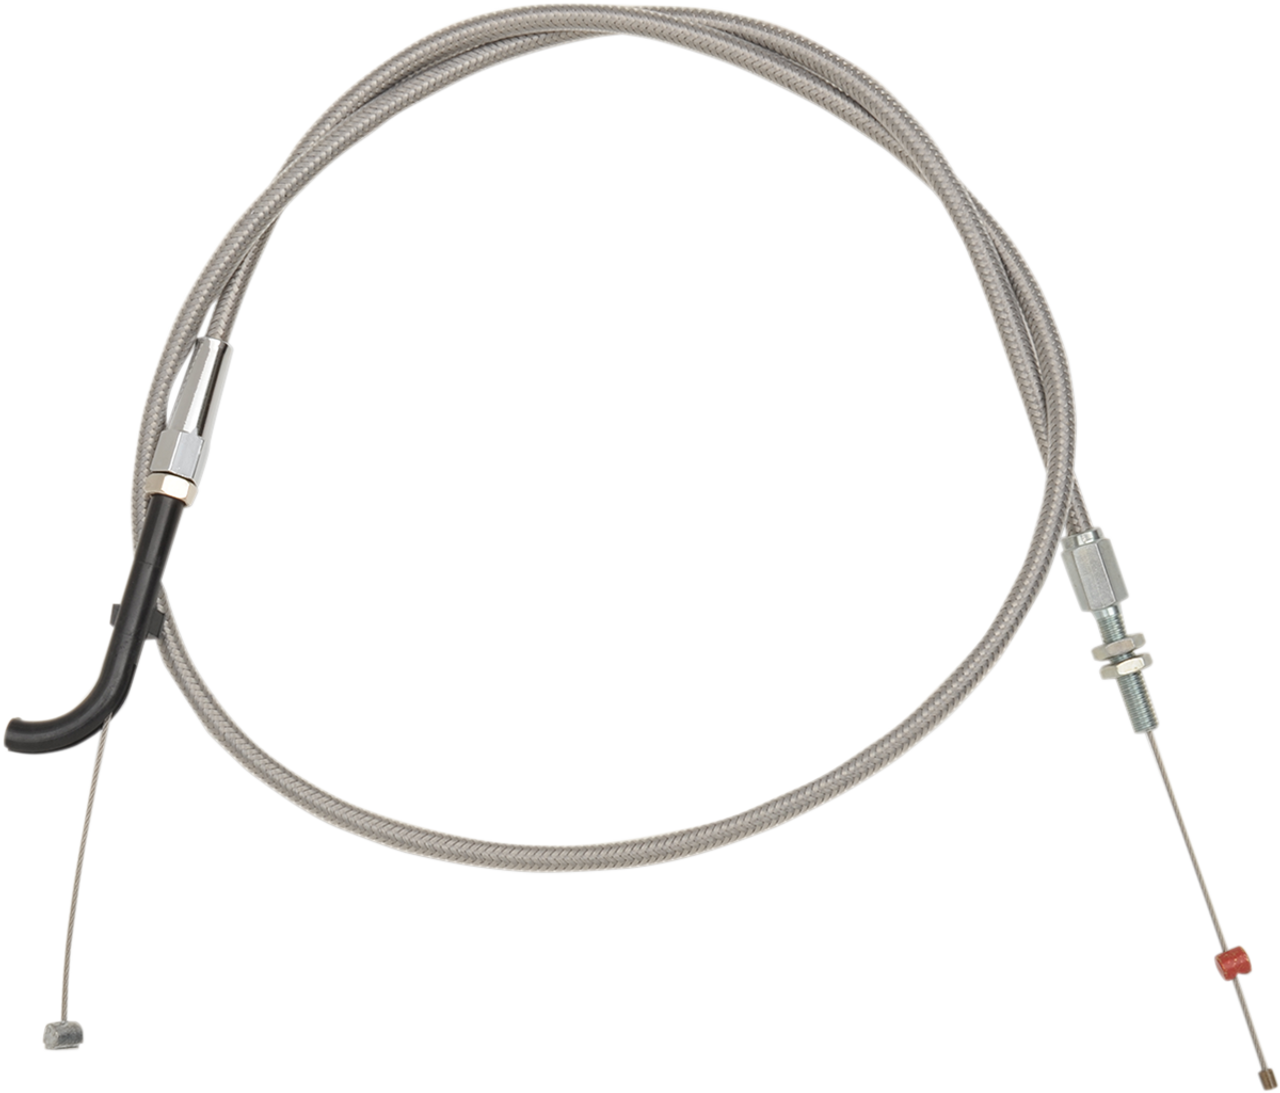 Throttle Cable - +6" - Victory - Stainless Steel